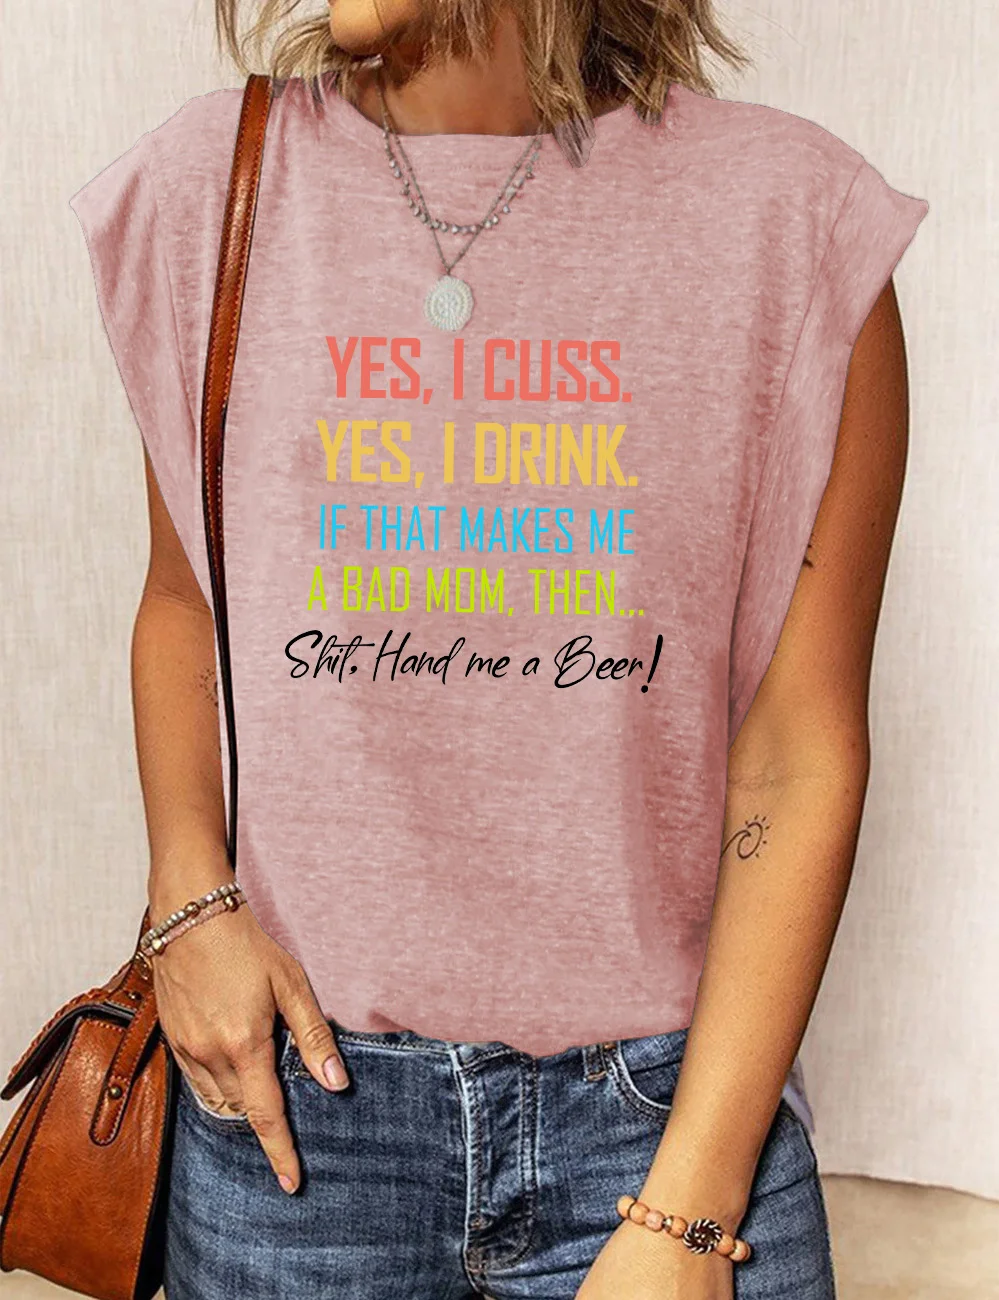 Yes I Cuss Yes I Drink If That Makes Me A Bad Mom T-Shirt